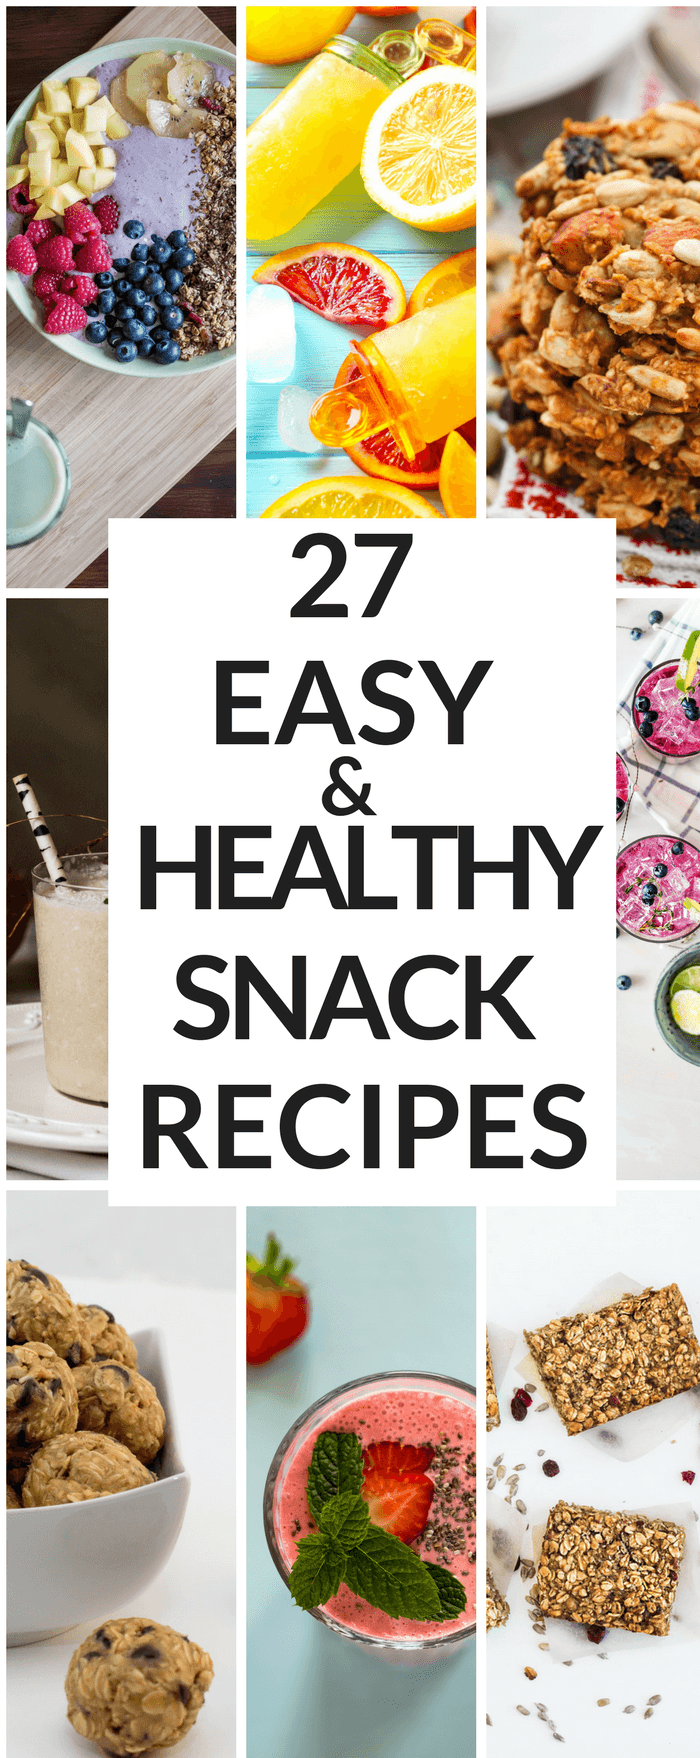 27 Easy & Healthy Snack Ideas for Moms & Kids-Word to Your Mother Blog